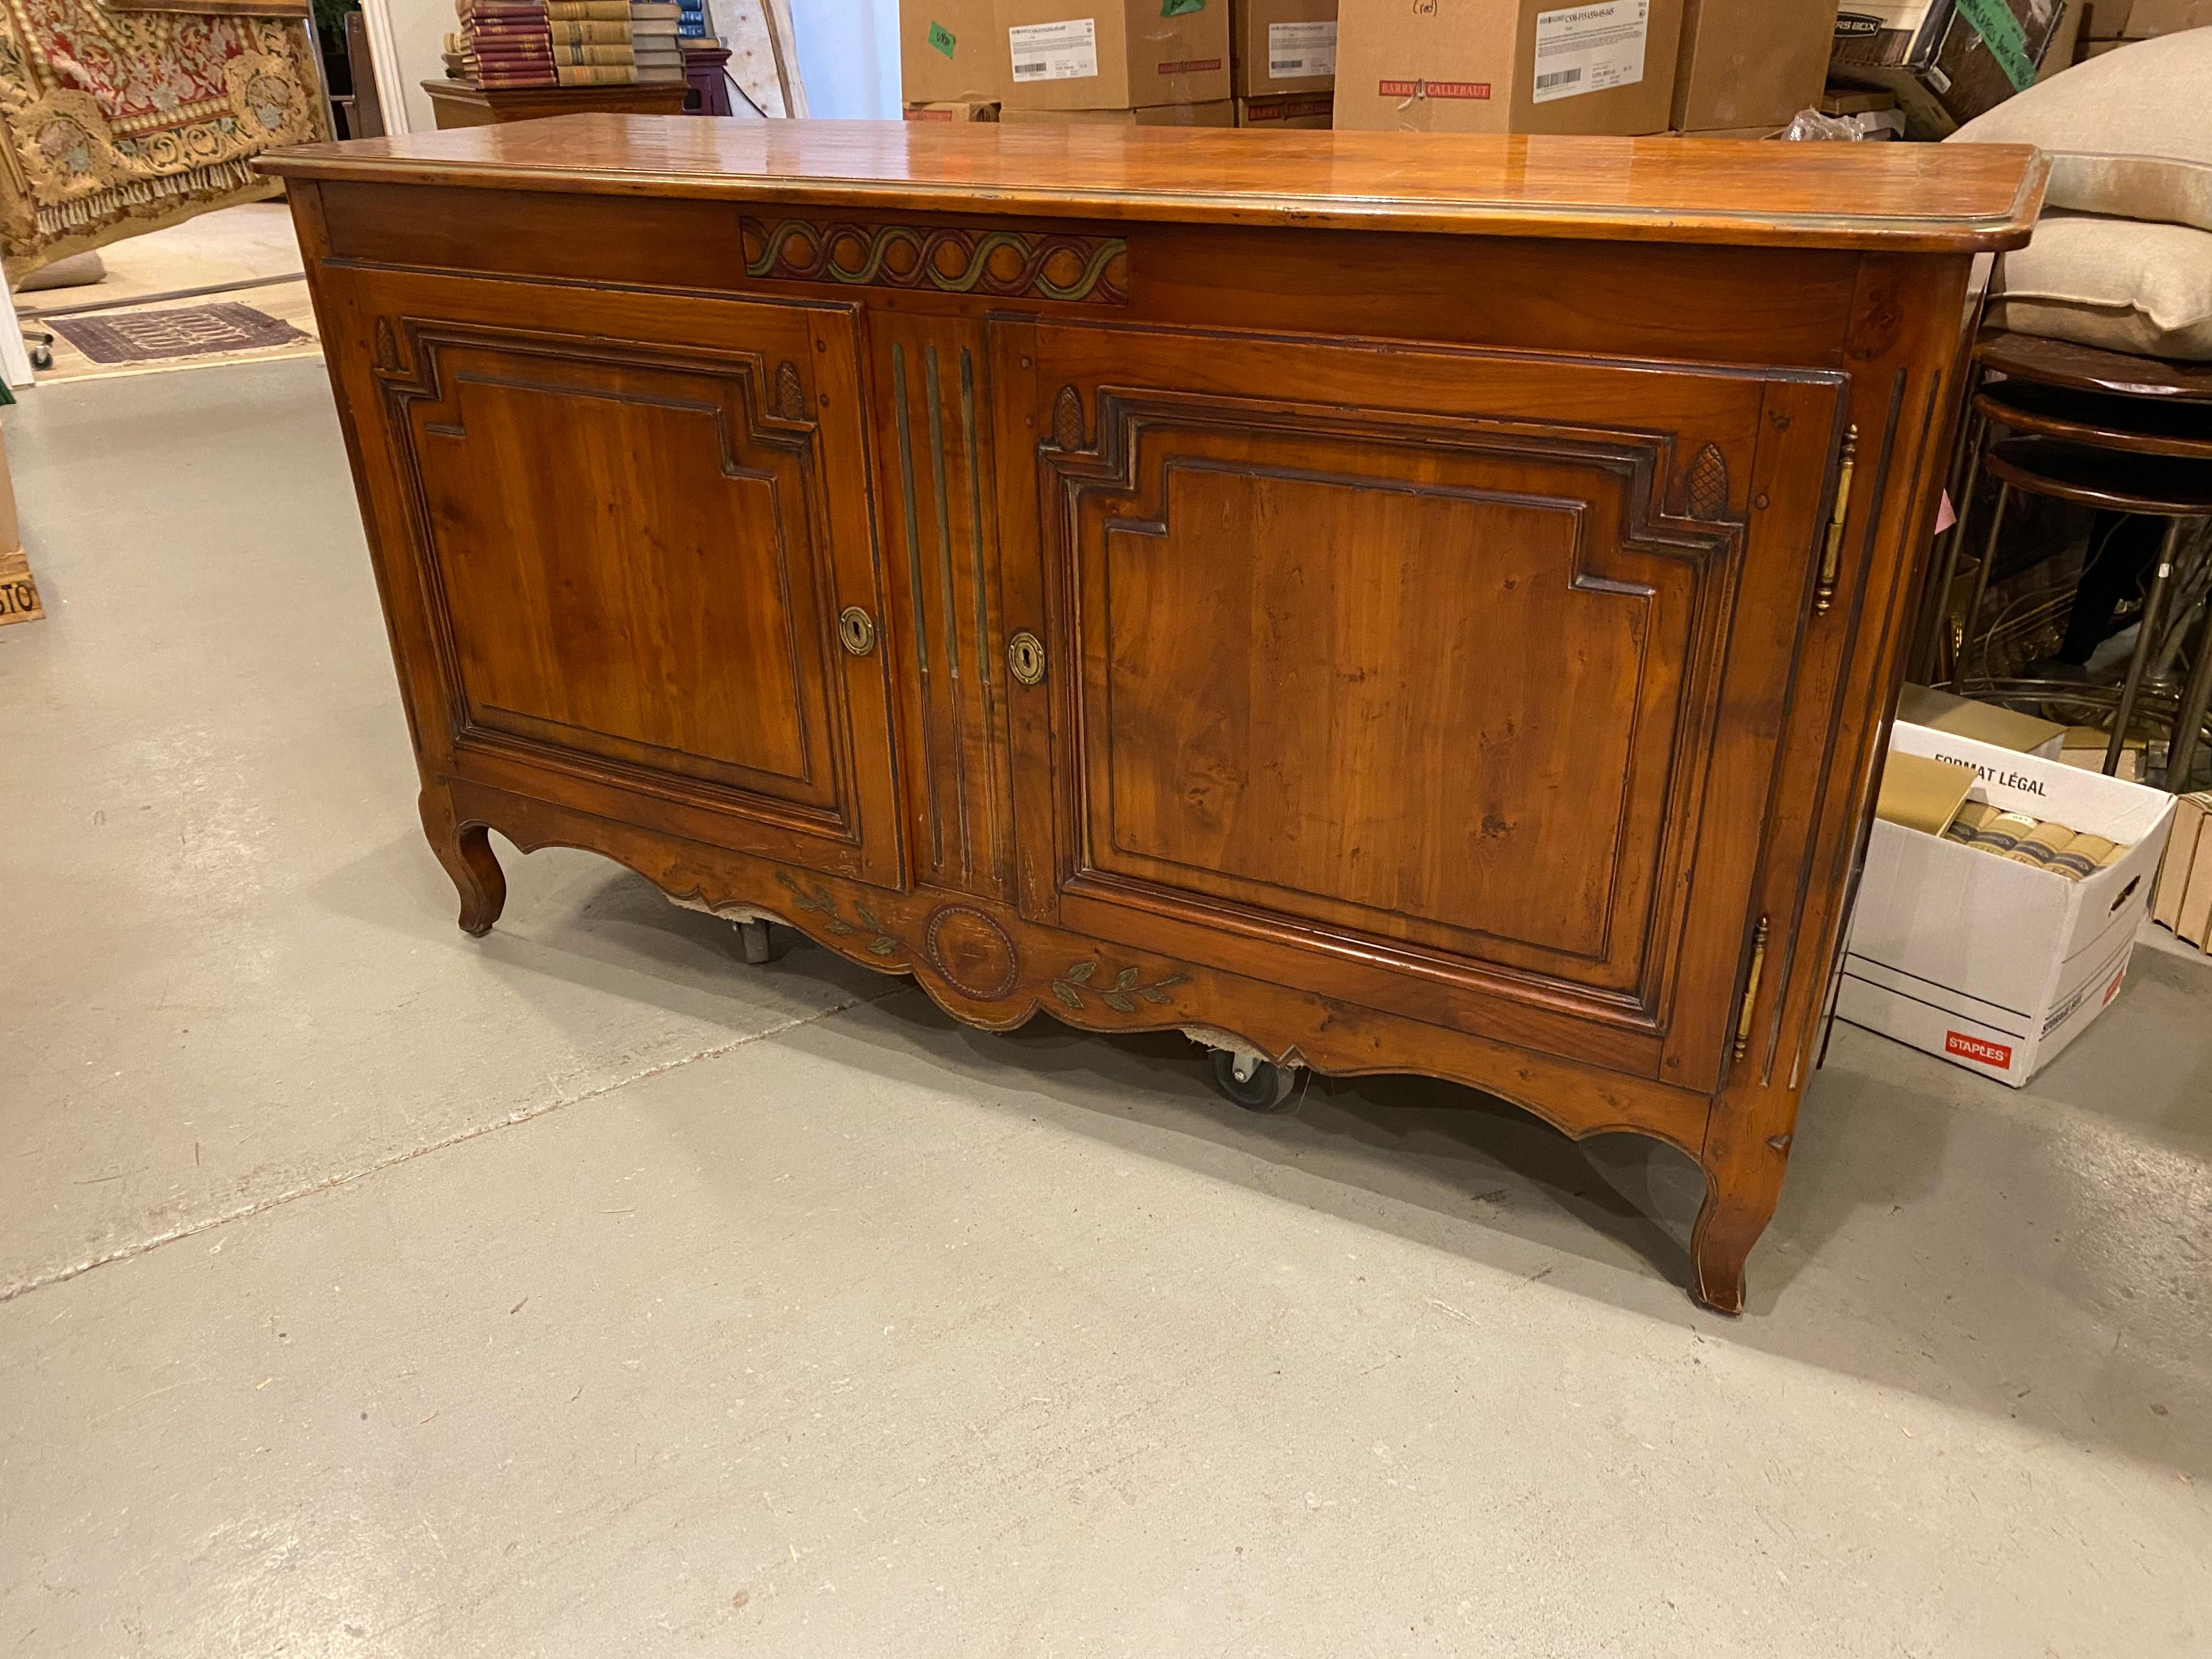 A lovely two door hand crafted French buffet sideboard with concealed drawer. This sideboard crafted in solid cherry is a quality piece finished in warm ochre brown cherry stain with a subtle accent of green as seen in the photos. The carving in the